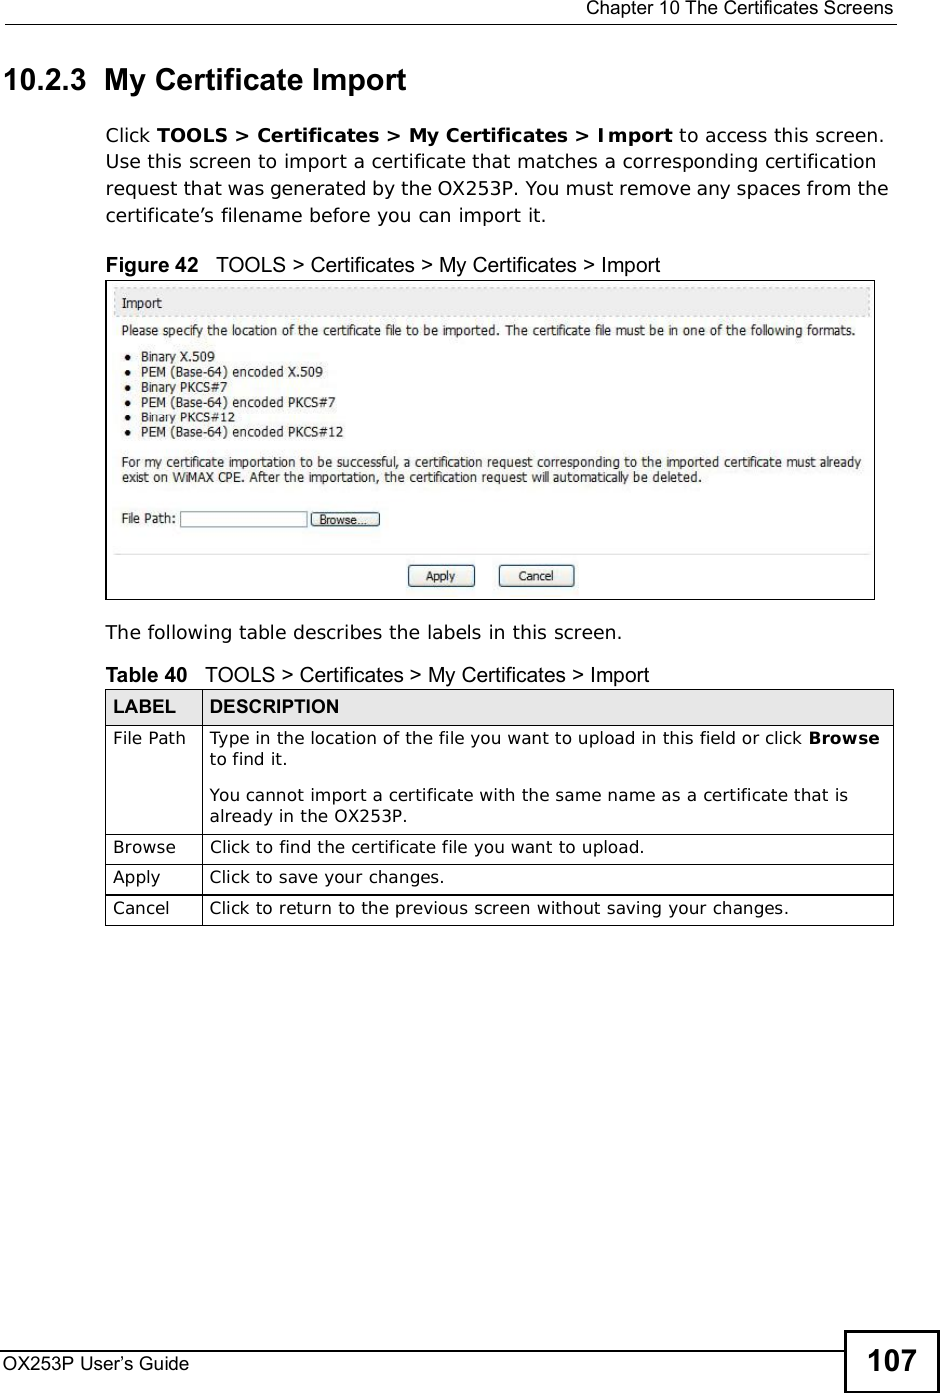  Chapter 10The Certificates ScreensOX253P User’s Guide 10710.2.3  My Certificate ImportClick TOOLS &gt; Certificates &gt; My Certificates &gt; Import to access this screen. Use this screen to import a certificate that matches a corresponding certification request that was generated by the OX253P. You must remove any spaces from the certificate’s filename before you can import it.Figure 42   TOOLS &gt; Certificates &gt; My Certificates &gt; ImportThe following table describes the labels in this screen.  Table 40   TOOLS &gt; Certificates &gt; My Certificates &gt; ImportLABEL DESCRIPTIONFile Path Type in the location of the file you want to upload in this field or click Browseto find it.You cannot import a certificate with the same name as a certificate that is already in the OX253P.Browse Click to find the certificate file you want to upload. Apply Click to save your changes.Cancel Click to return to the previous screen without saving your changes.